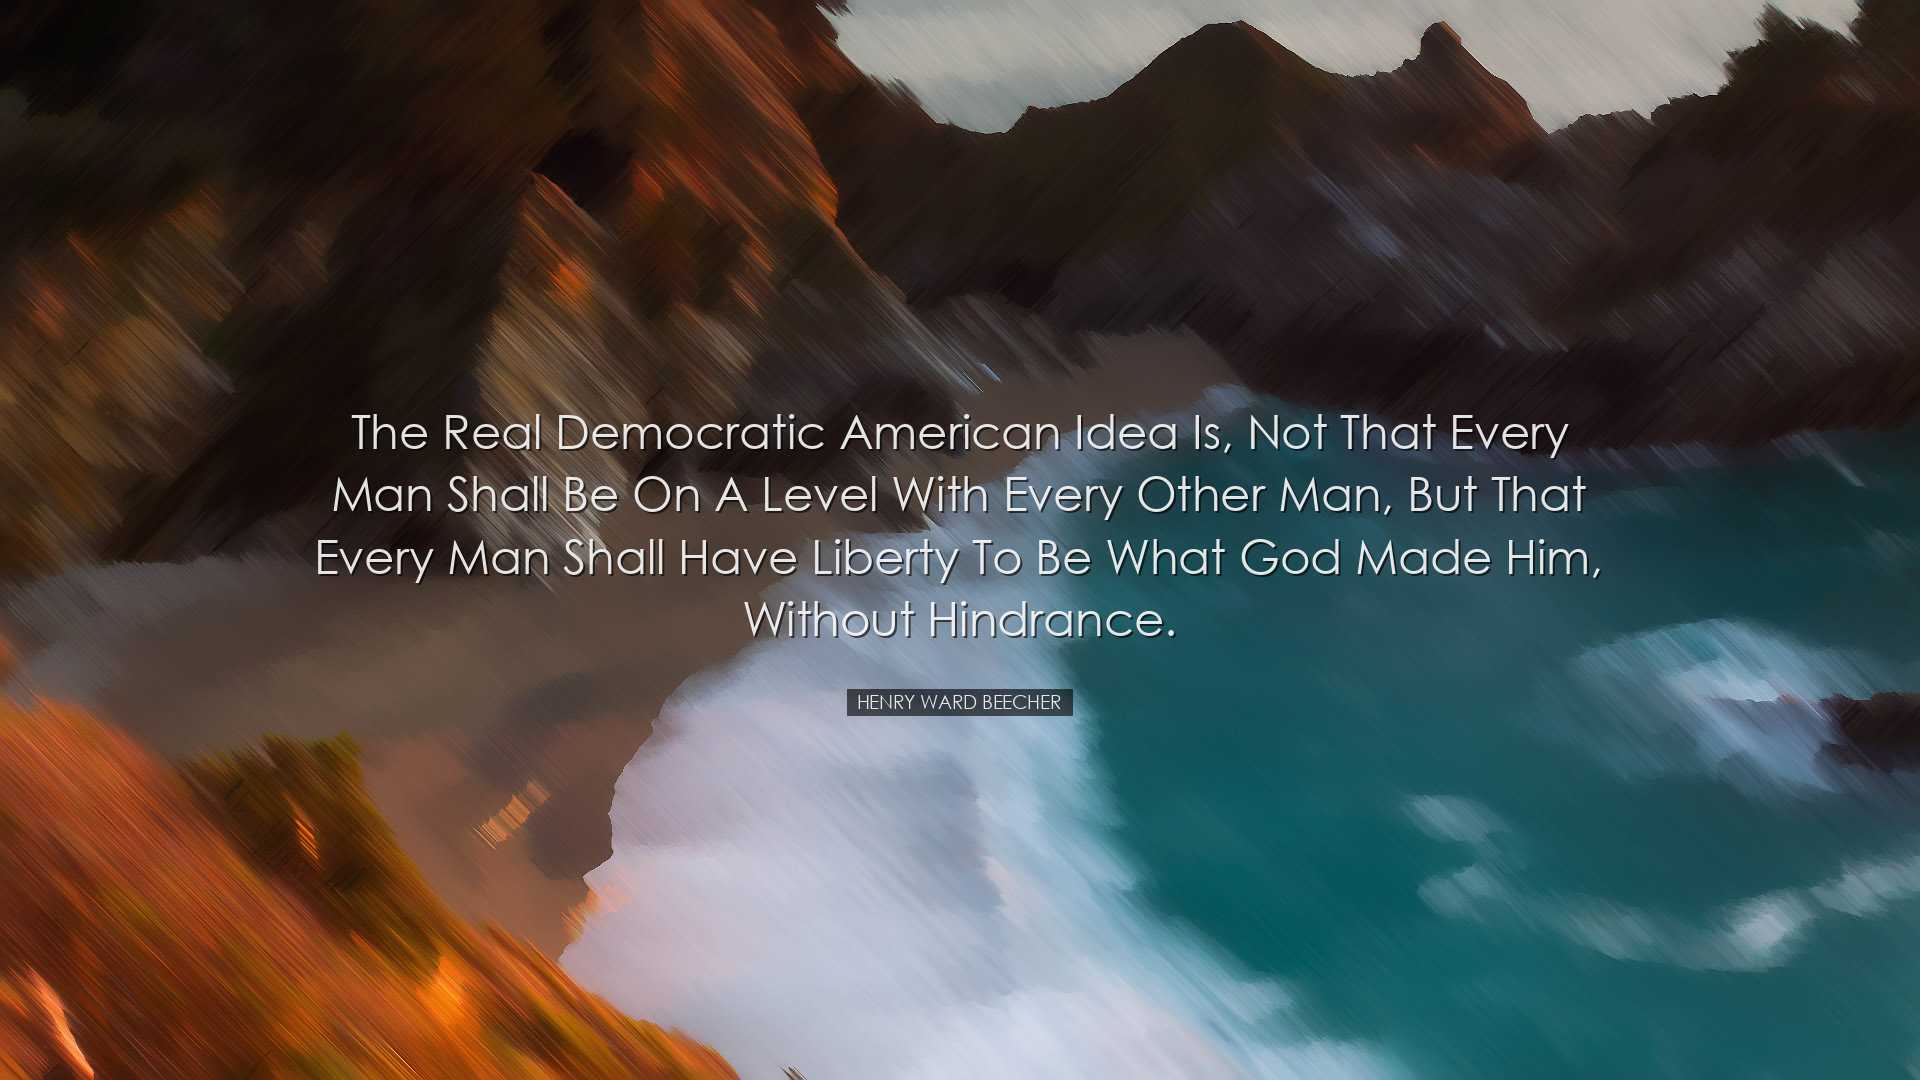 The real democratic American idea is, not that every man shall be